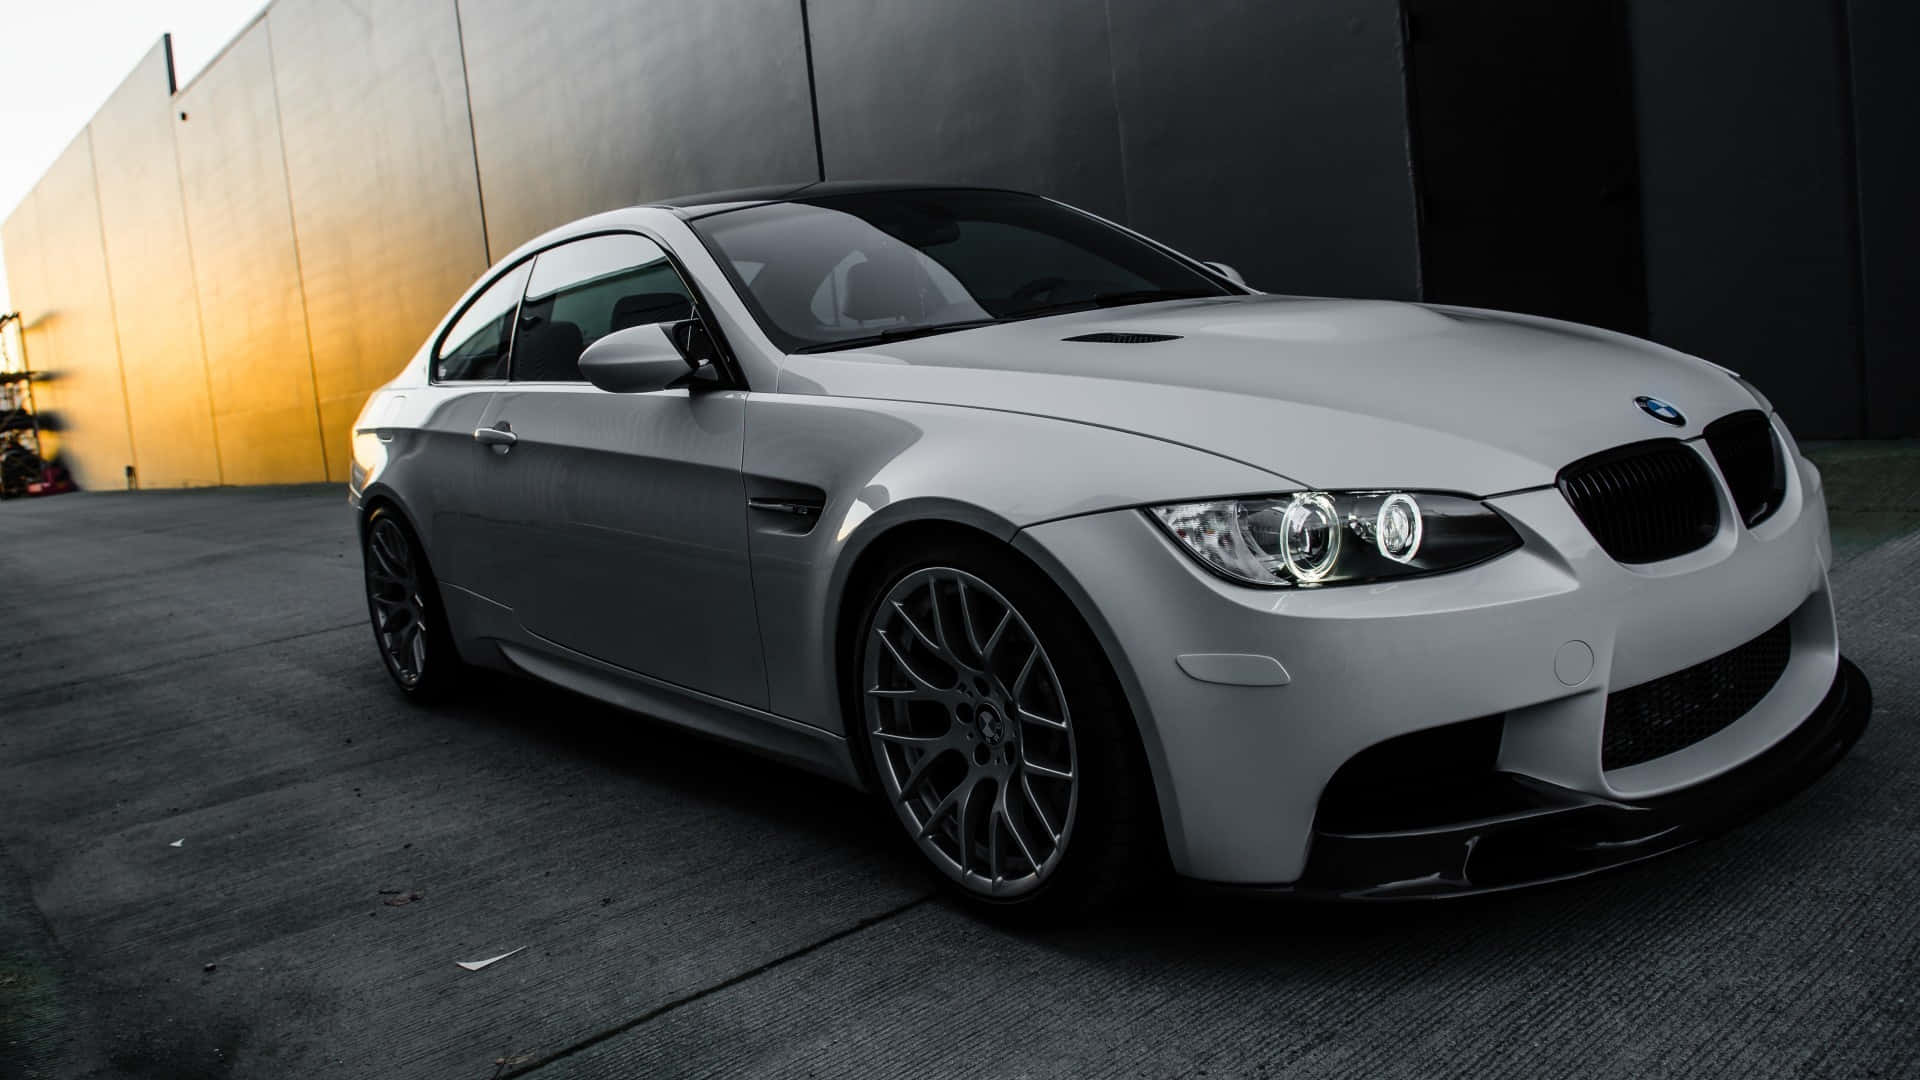 Get ready for an adventure in a luxurious BMW car Wallpaper